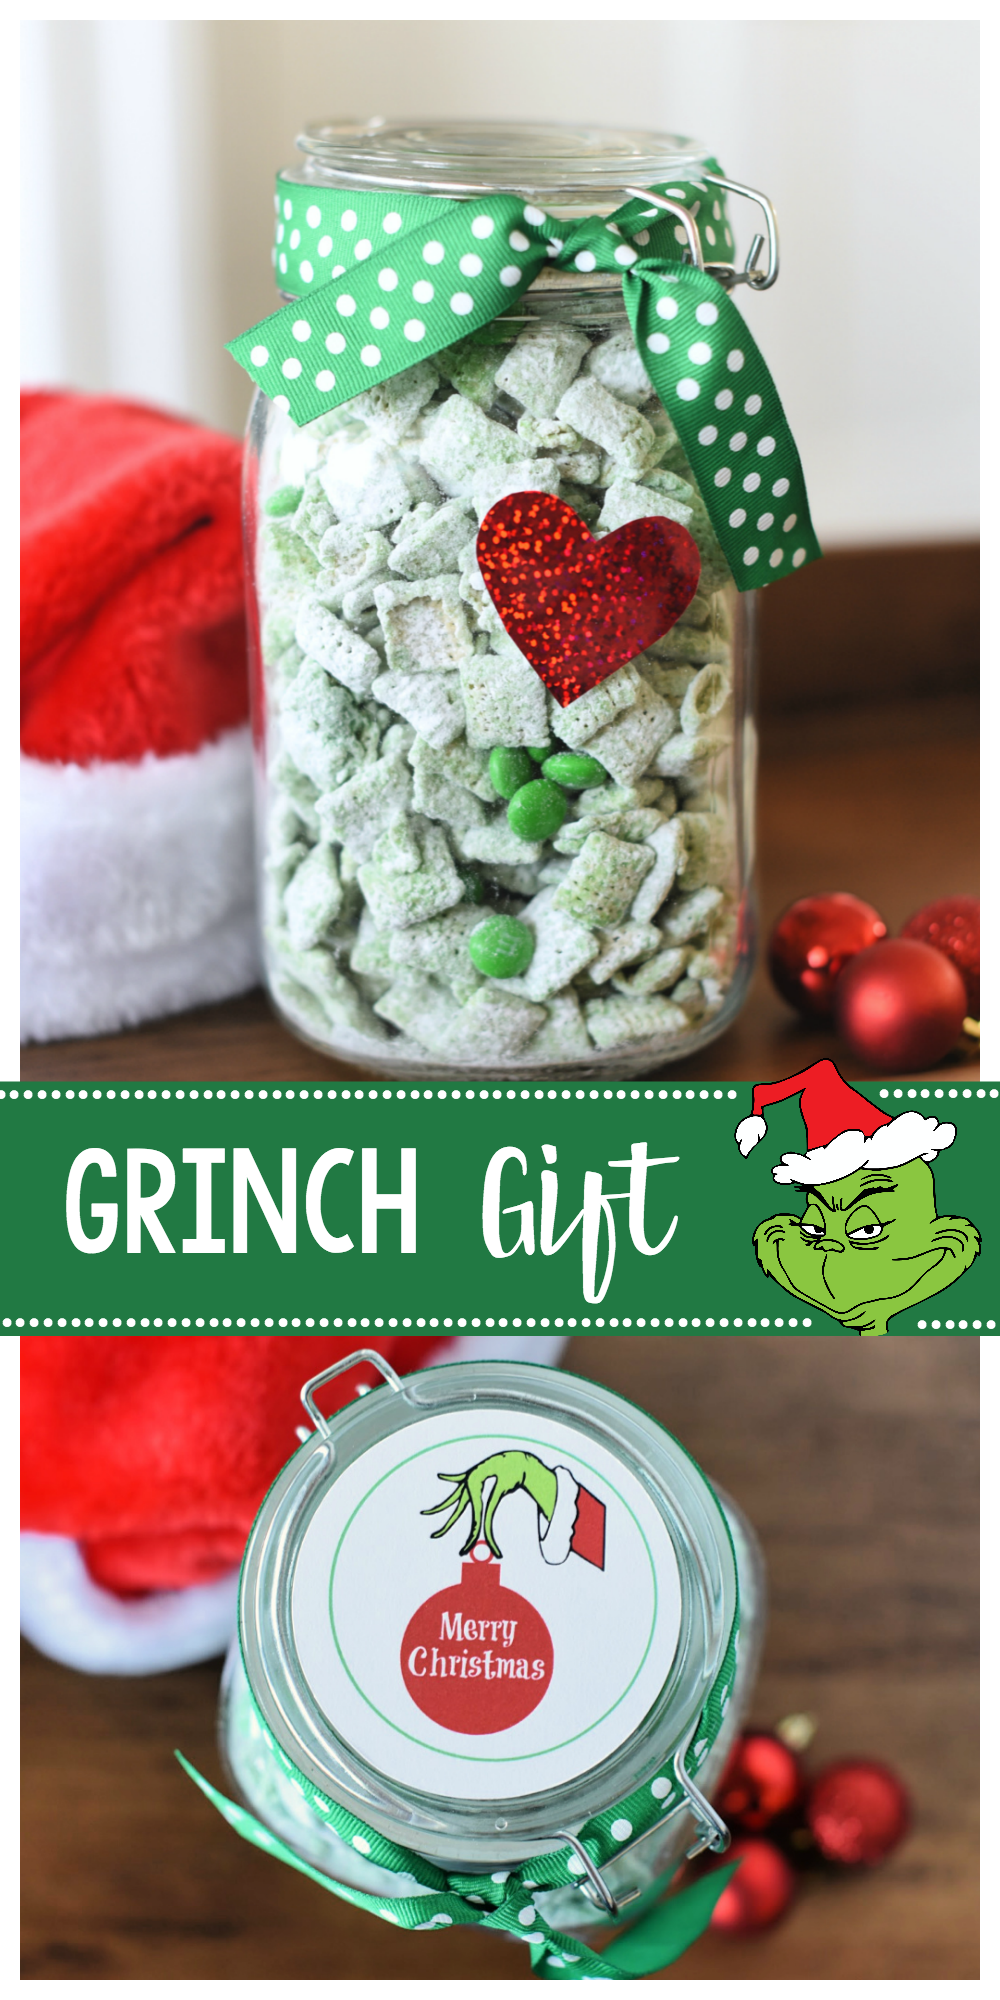 Grinch Gift Idea for Christmas-Fill a jar with this Grinch mix (peppermint muddy buddies) and add a red heart and this cute tag and you've got a fun gift for friends or neighbors! #grinch #merrychristmas #christmasgifts